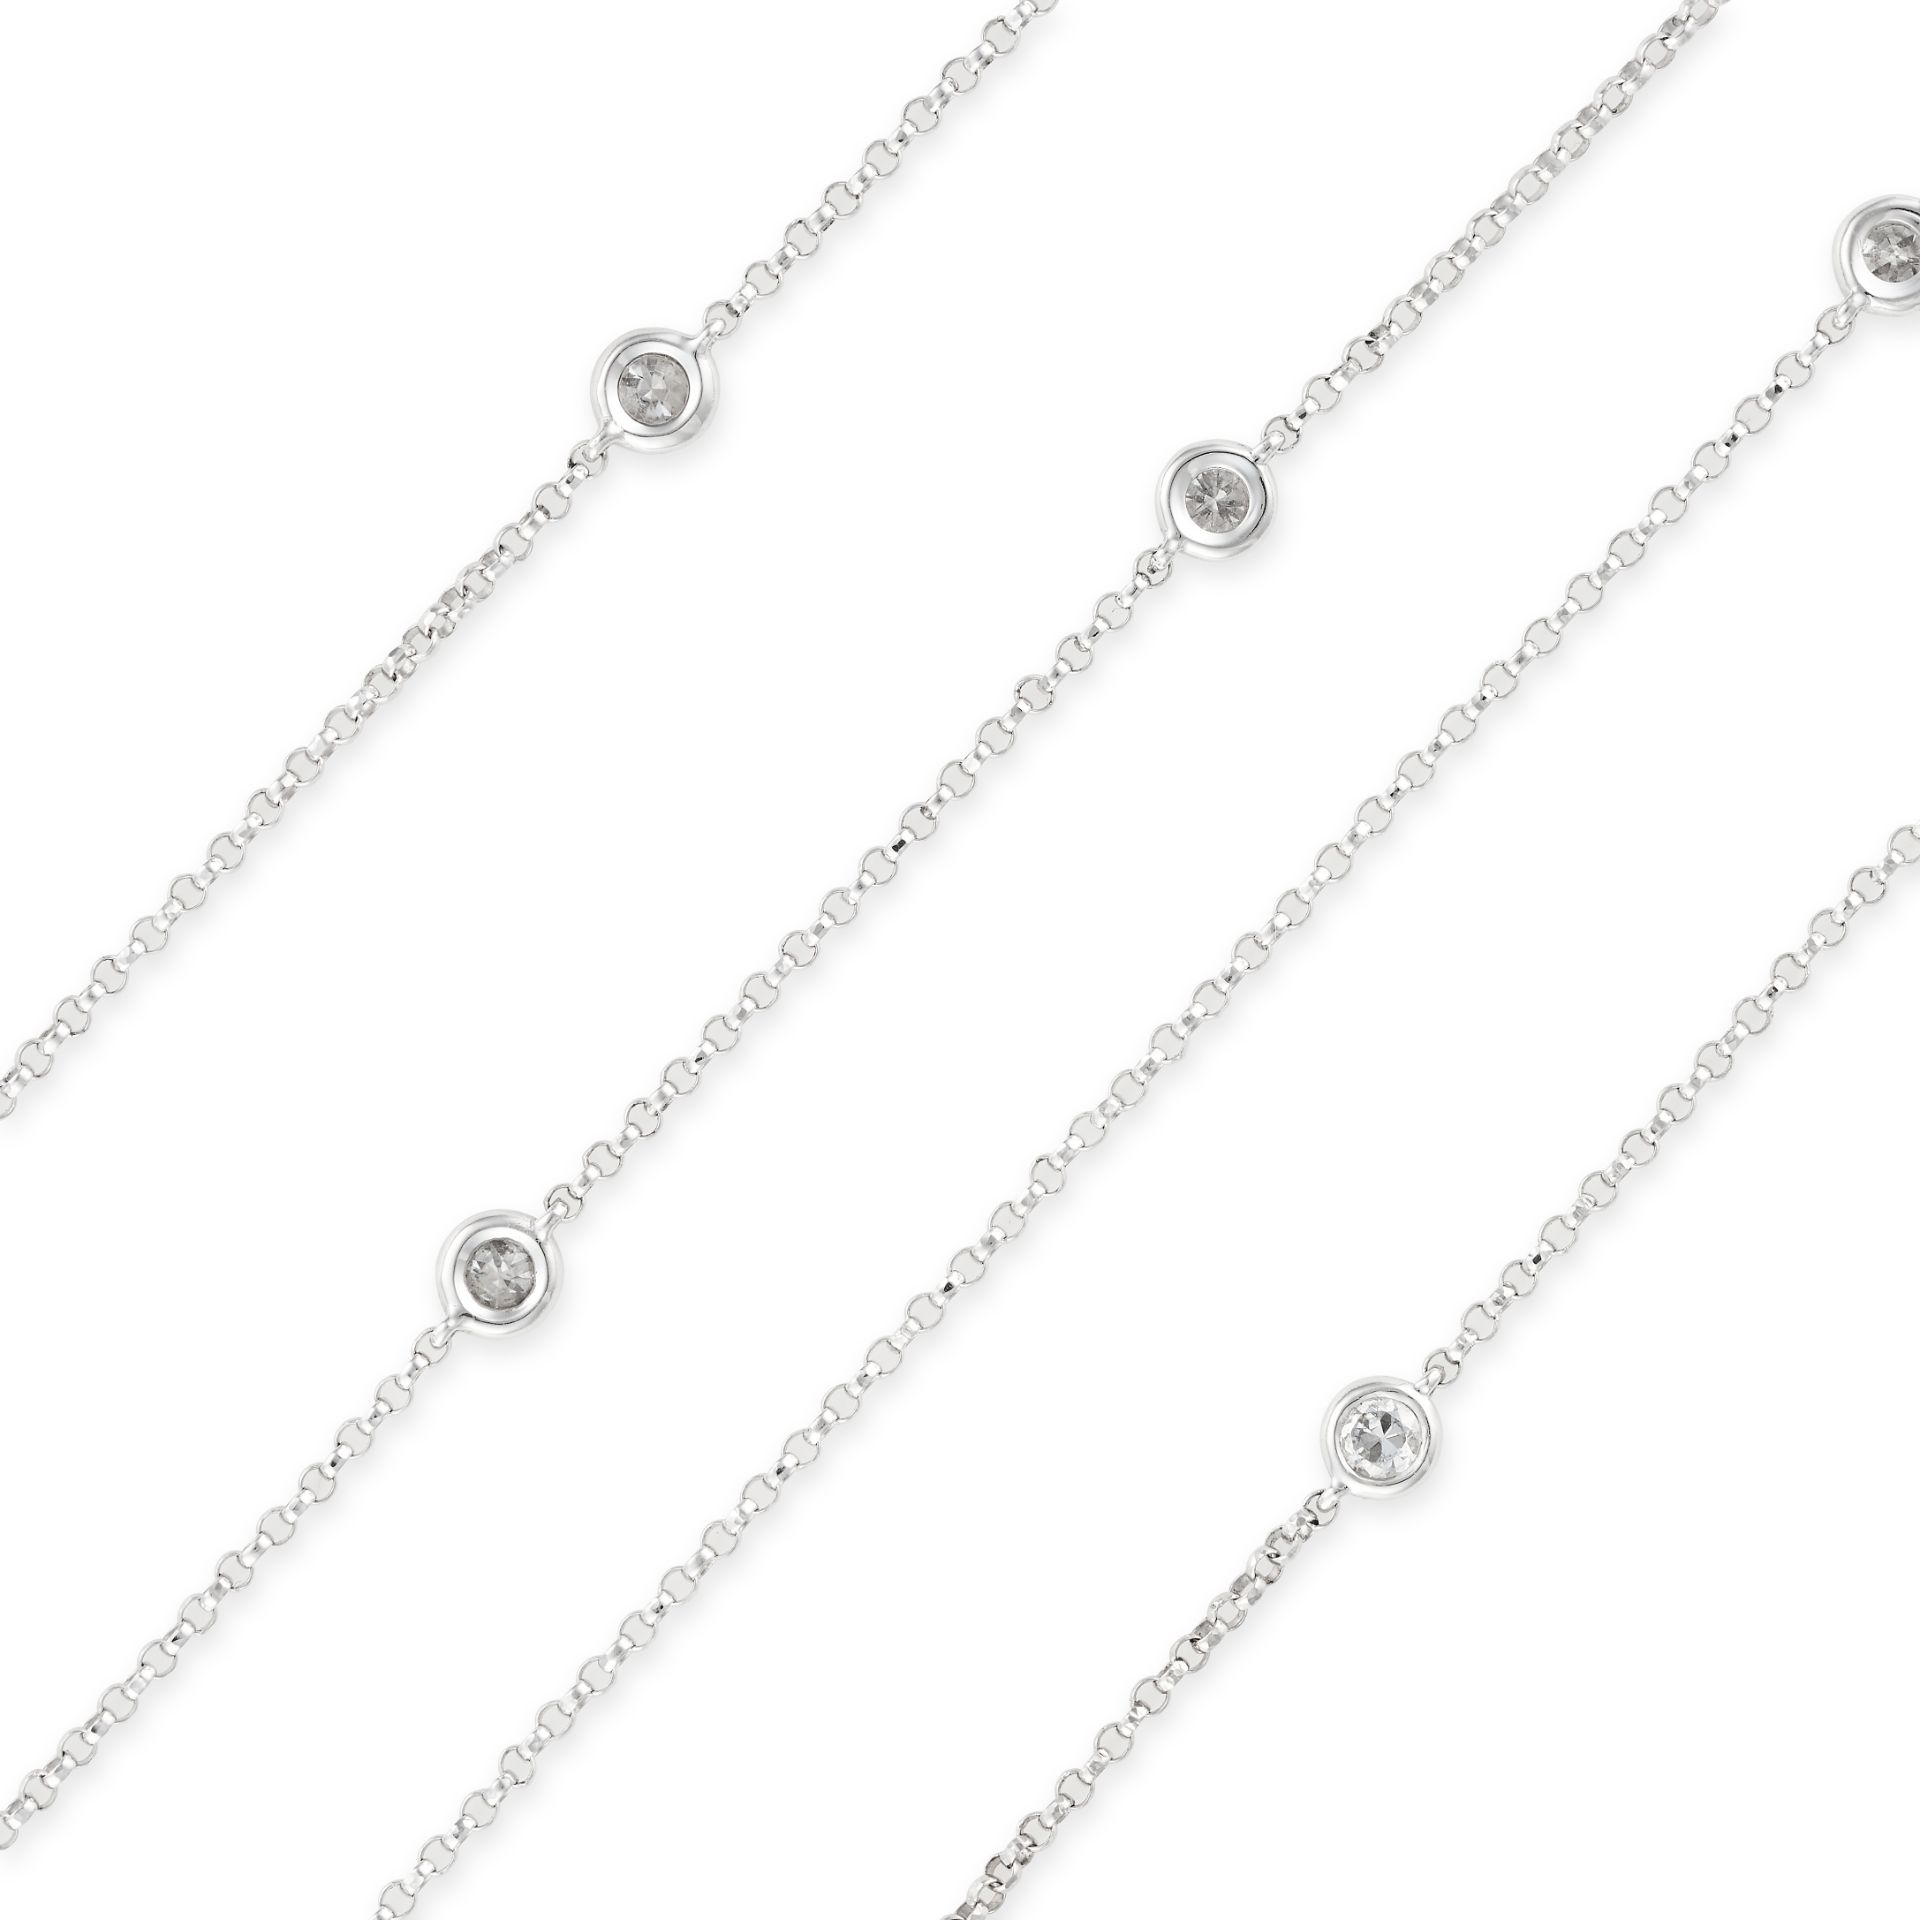 A DIAMOND CHAIN NECKLACE comprising a belcher chain set with ten staggered round cut diamonds, th...